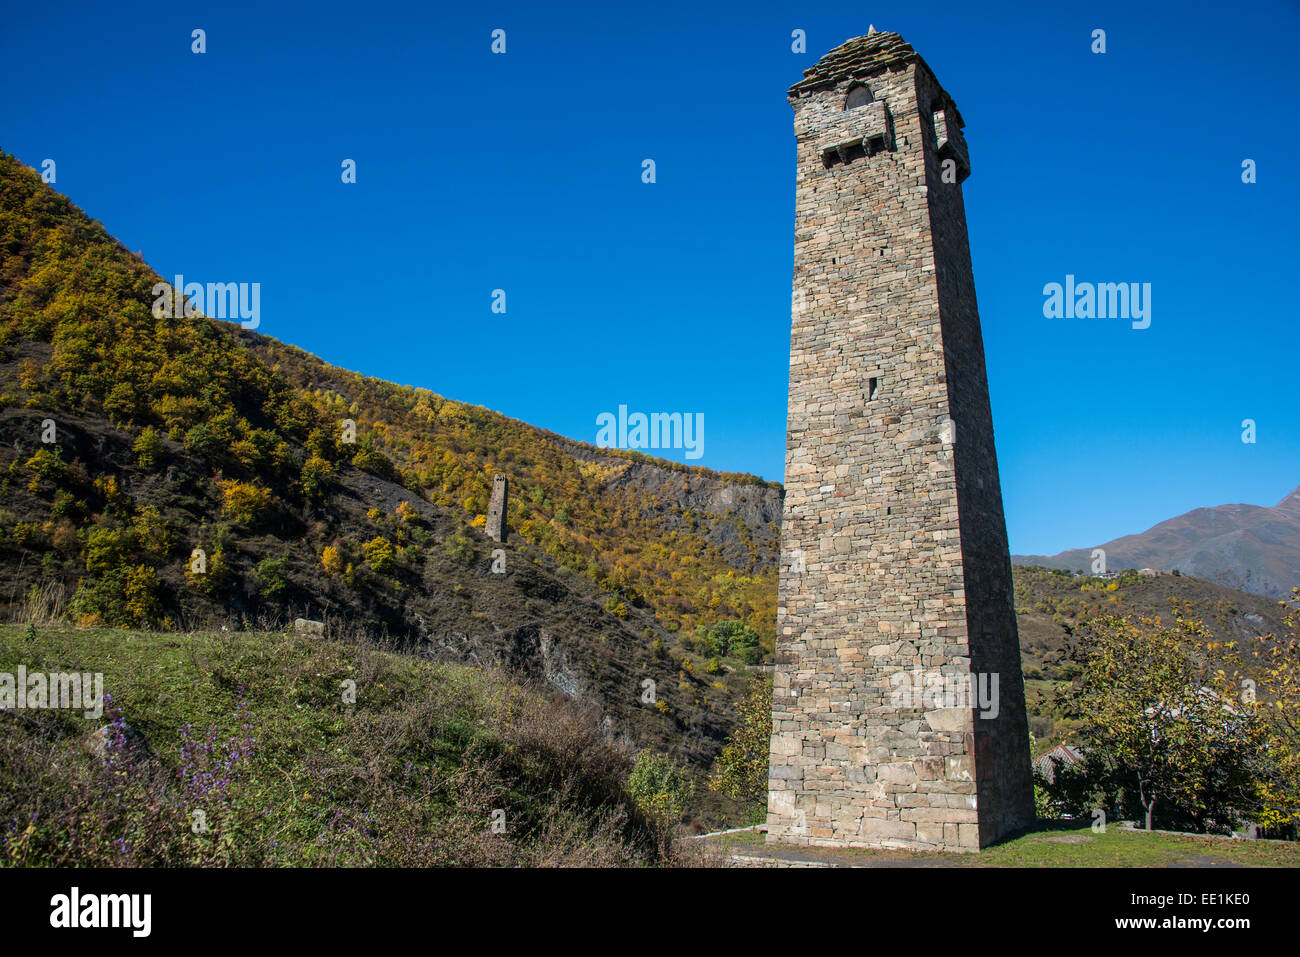 Chechen watchtowers in the Chechen Mountains near Itum Kale, Chechnya, Caucasus, Russia, Europe Stock Photo